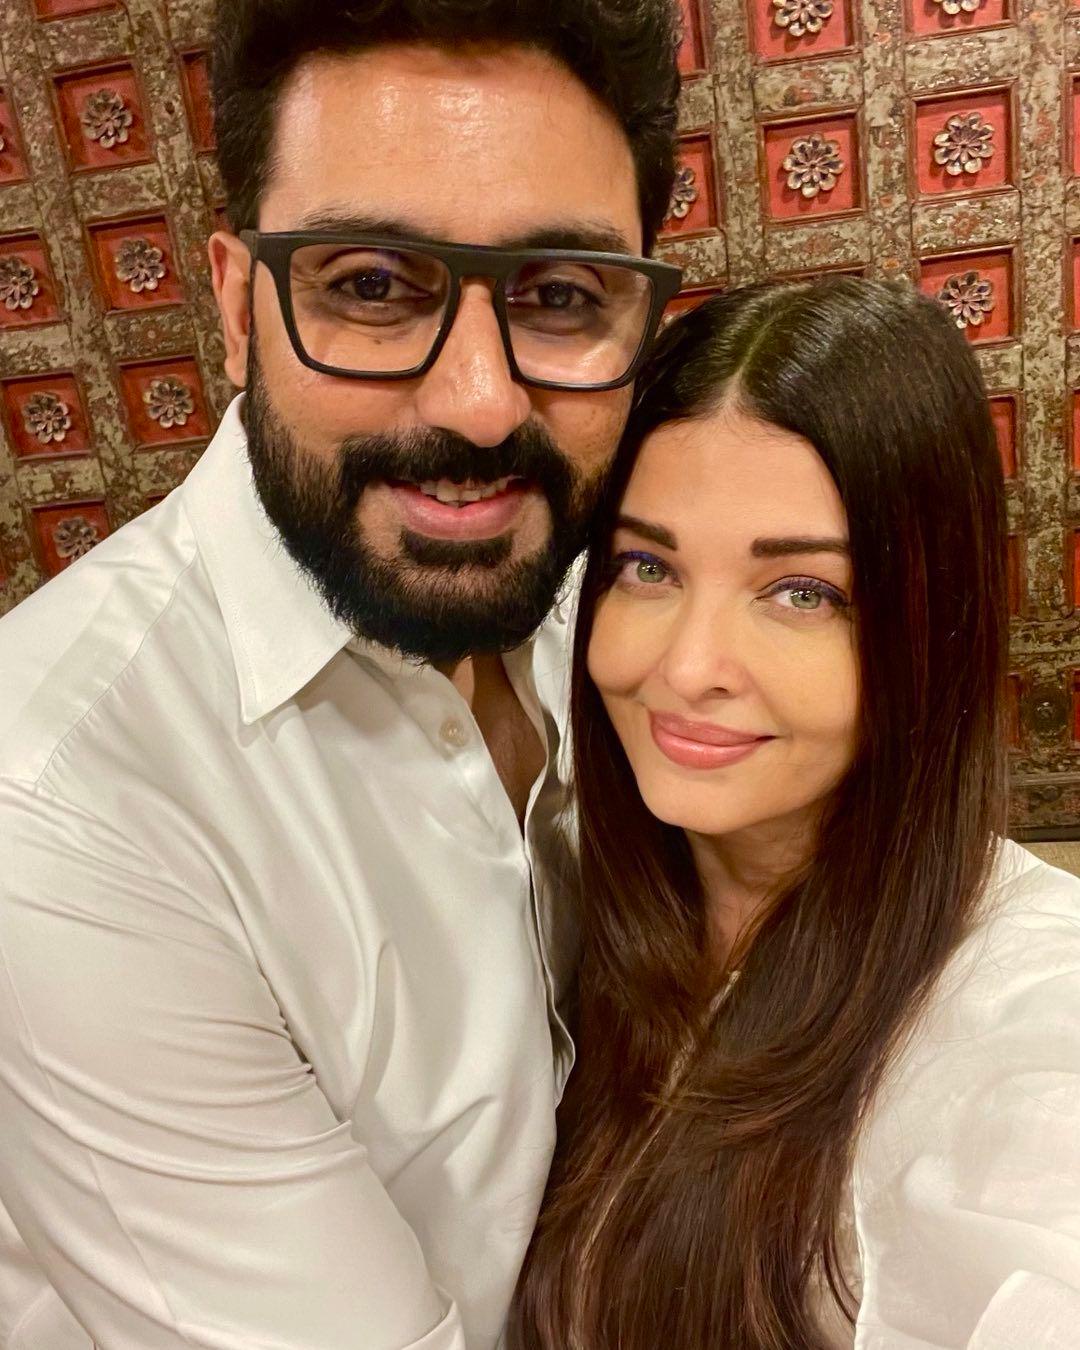 In 2007, Abhishek's love story with former Miss World Aishwarya Rai culminated in marriage. Their on-screen chemistry was electrifying, seen in films like 